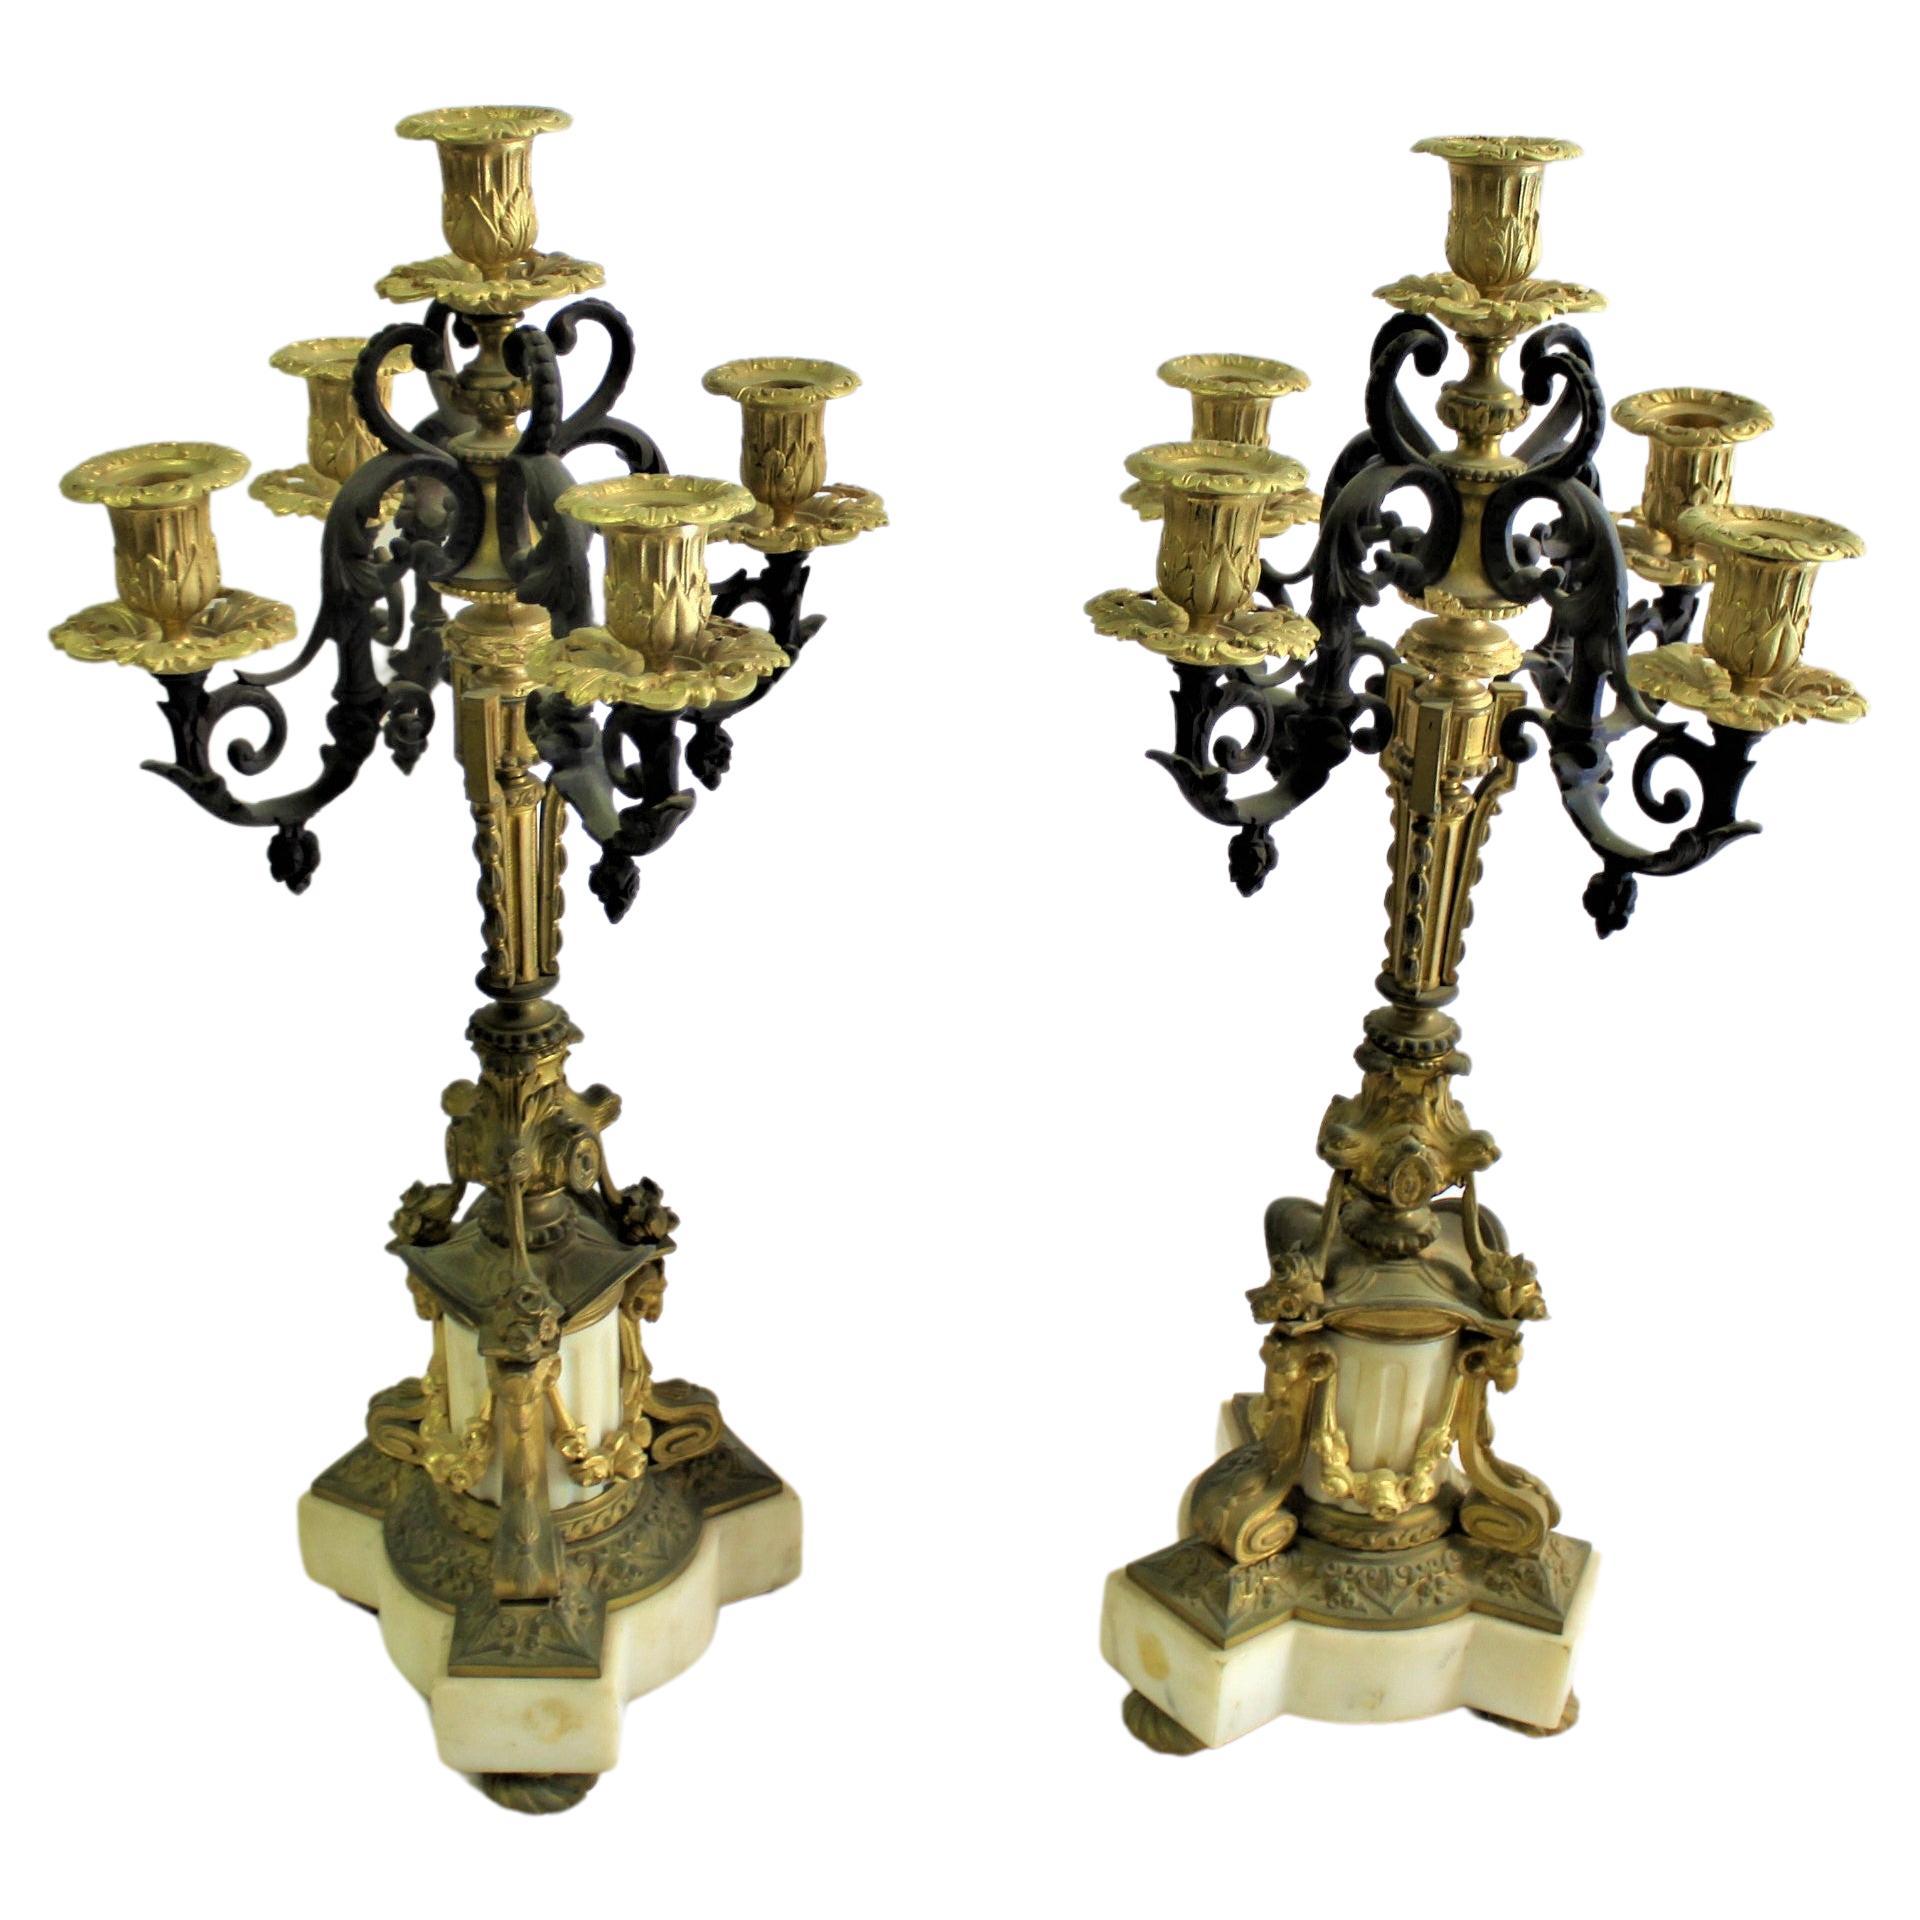 Candelabras, Antique Pair w/Dore' Gold Finish, 5 Arms For Sale